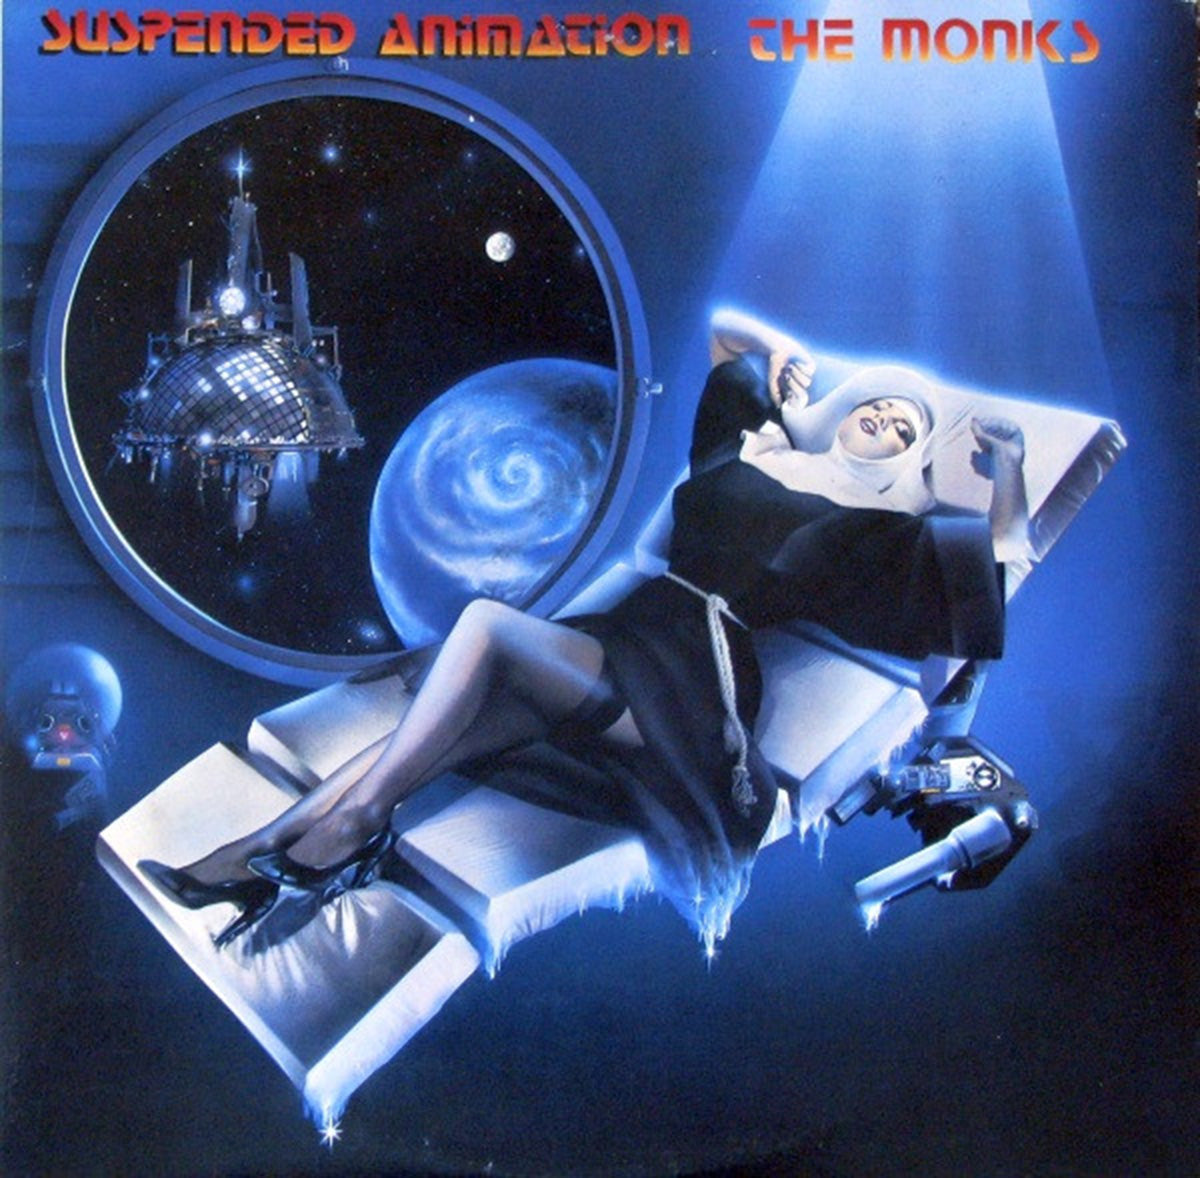 The Monks – Suspended Animation - 1981